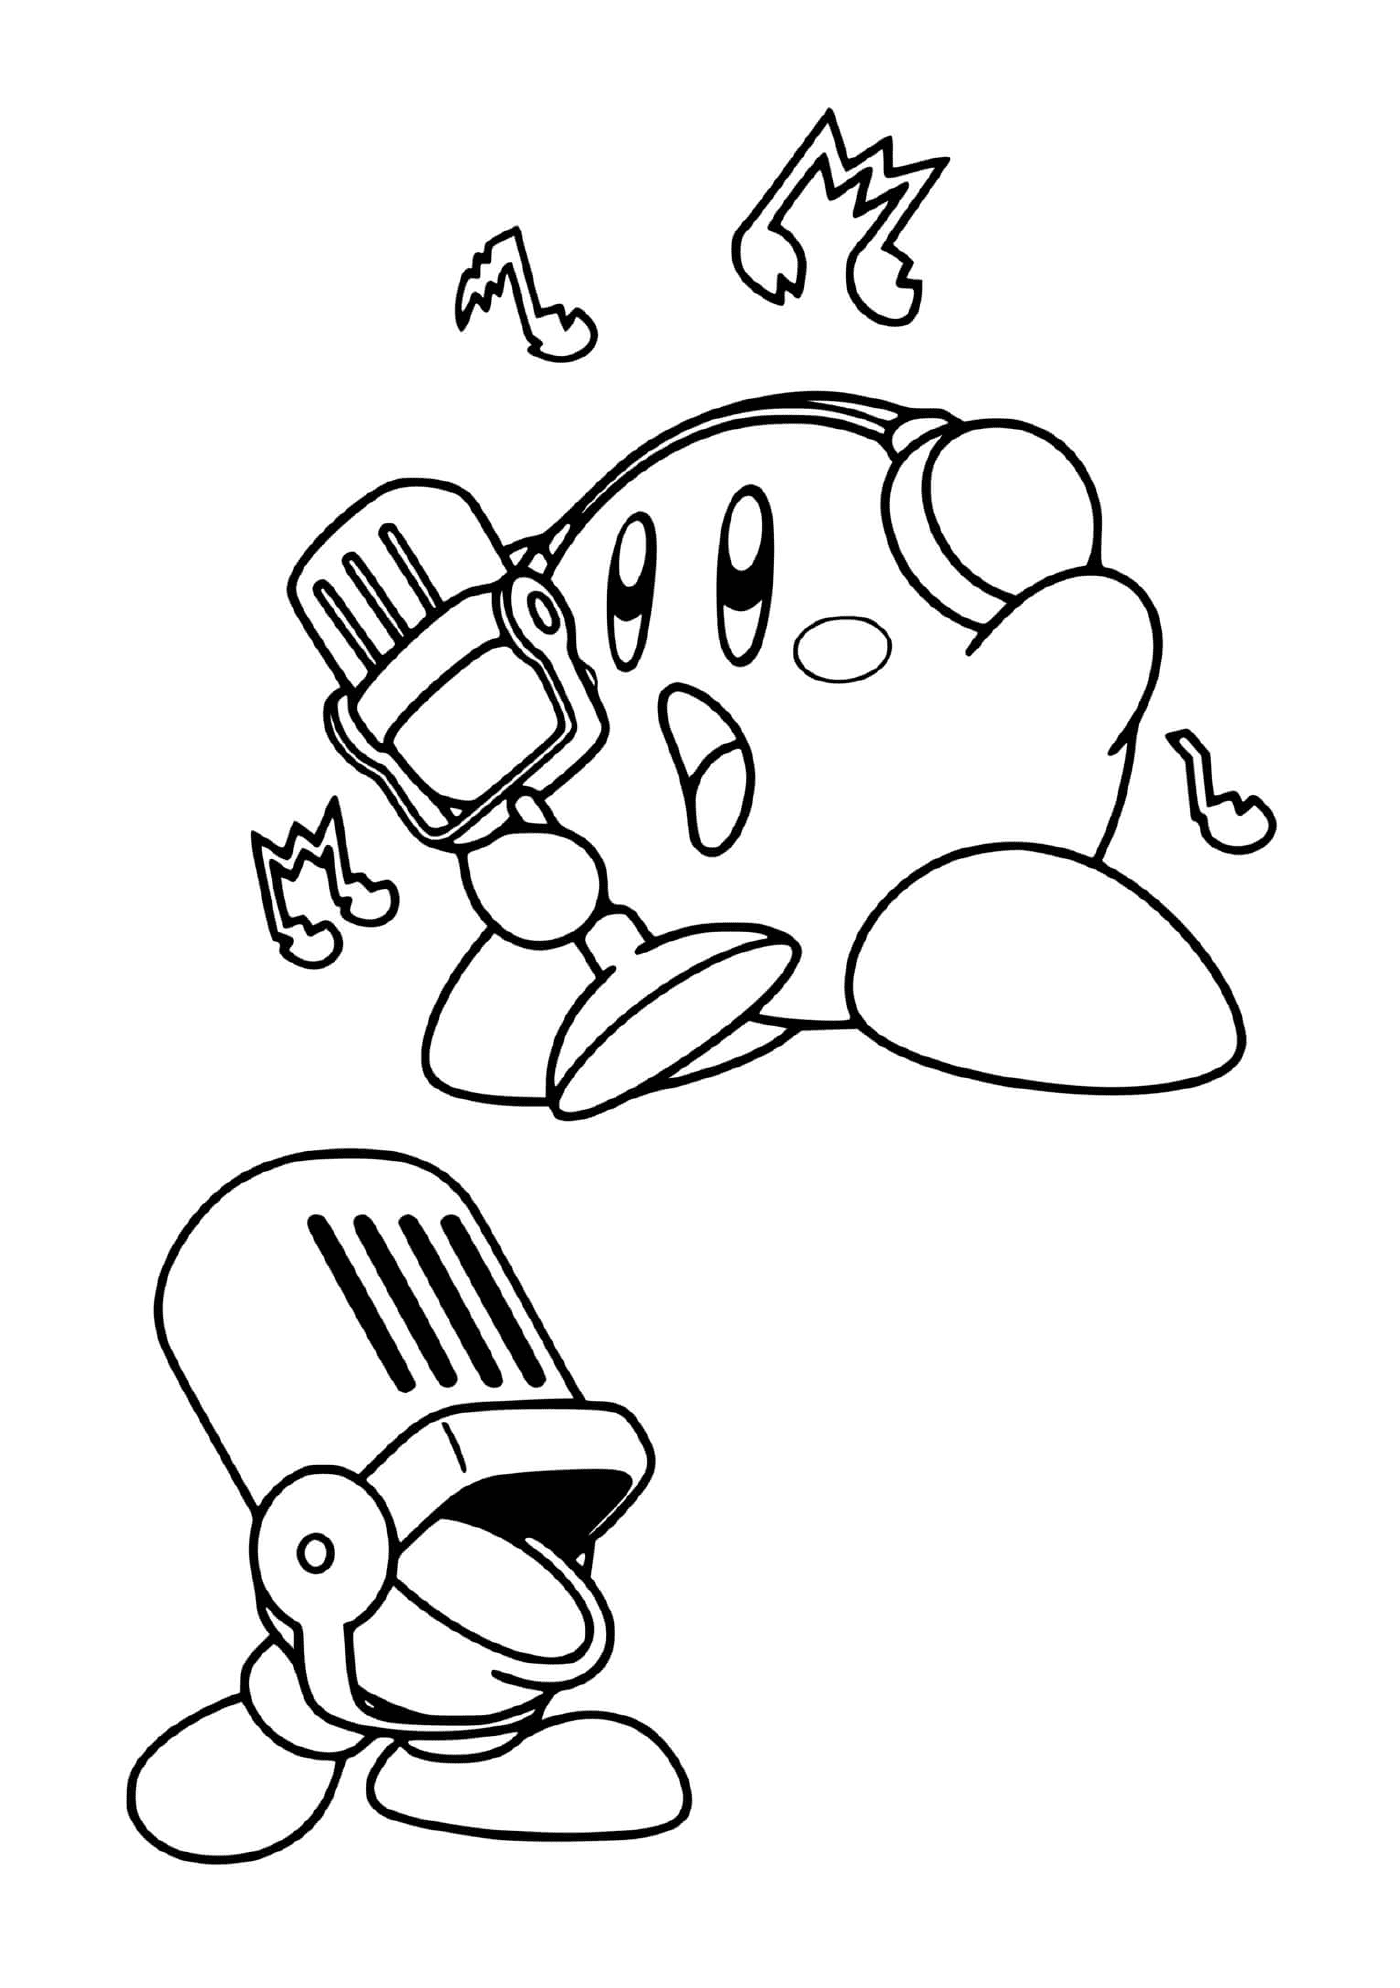  Talented Kirby with microphone 